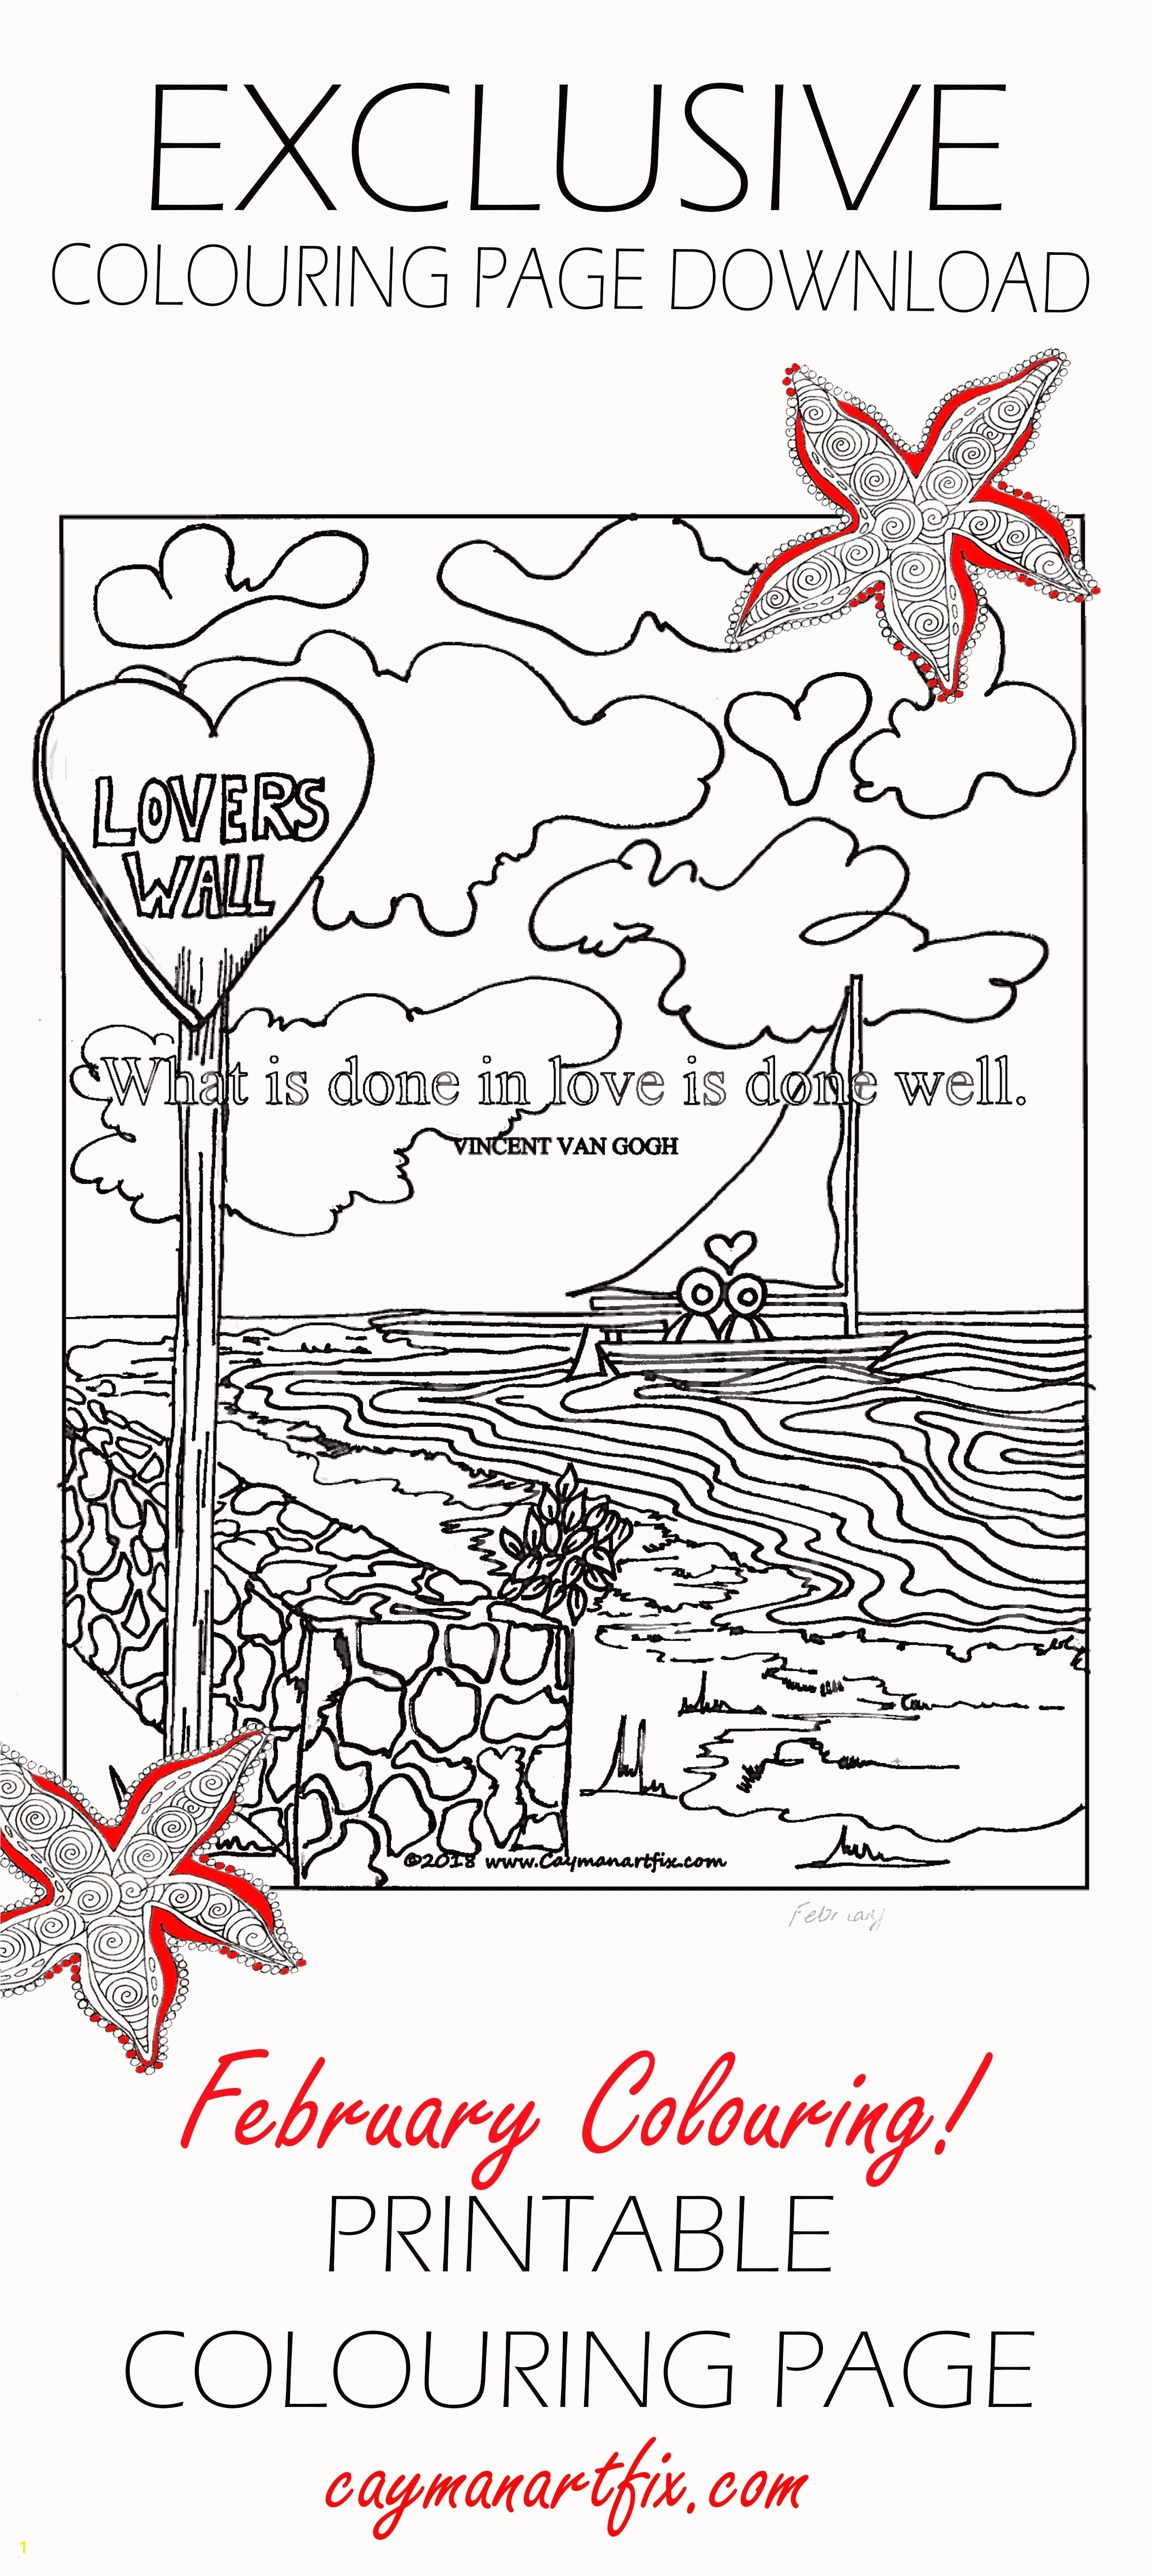 Jesus Boyhood Coloring Pages Quotes Coloring Pages Gallery thephotosync